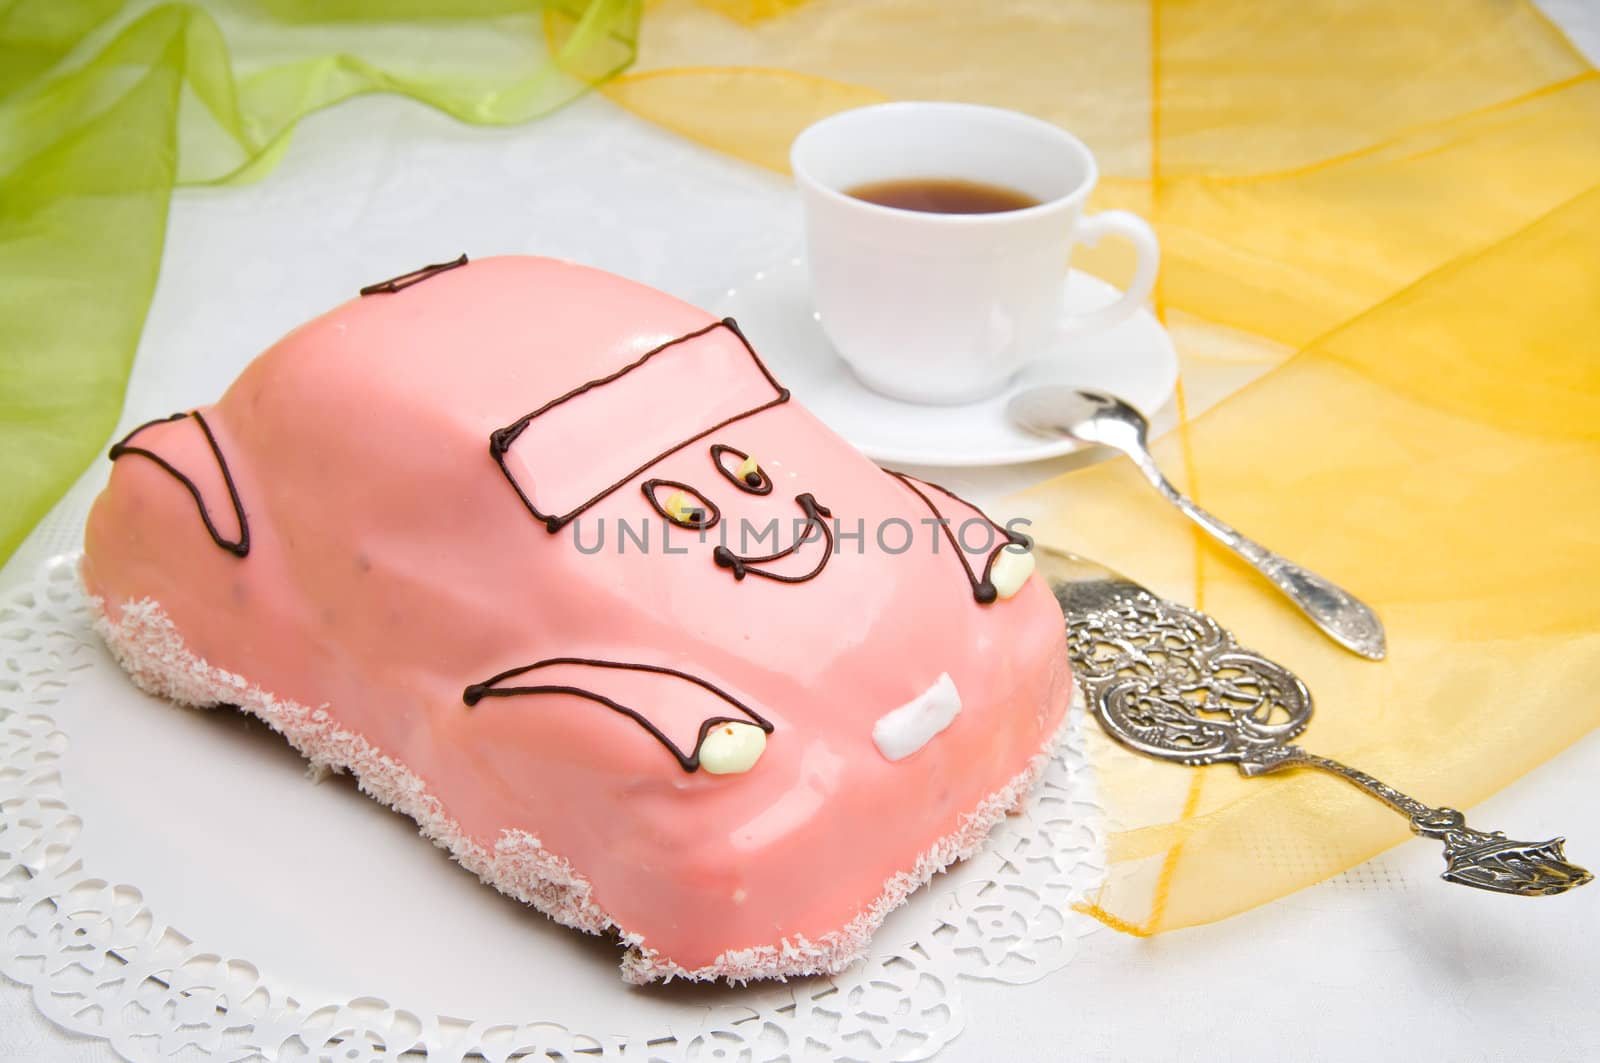 car cake with a cup of coffee by furzyk73